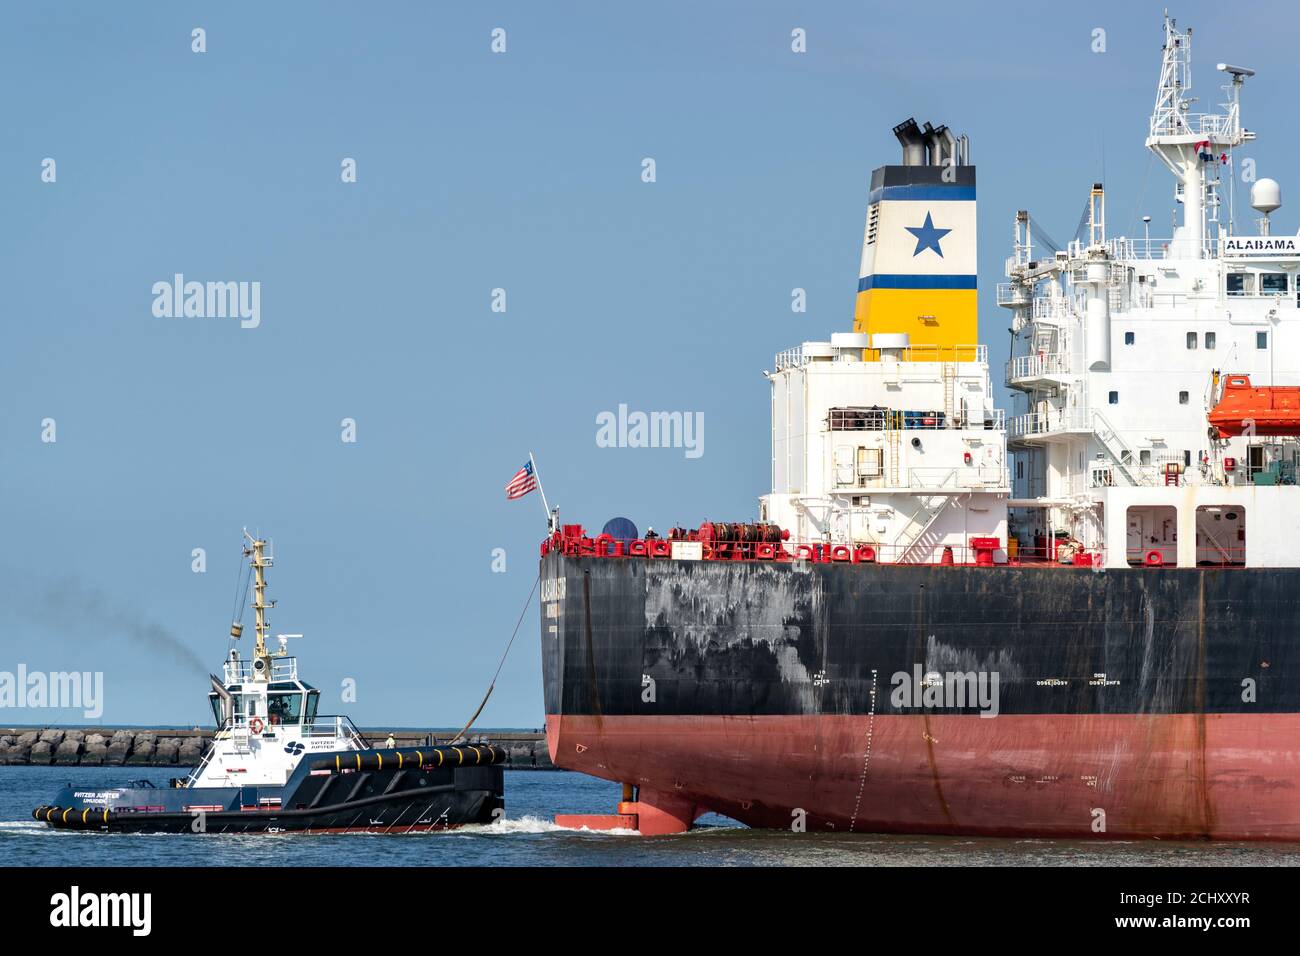 Tugboat SVITZER JUPITER at work. Svitzer is the global leader of towage and marine services and part of the A.P. Moller-Maersk Group. Stock Photo